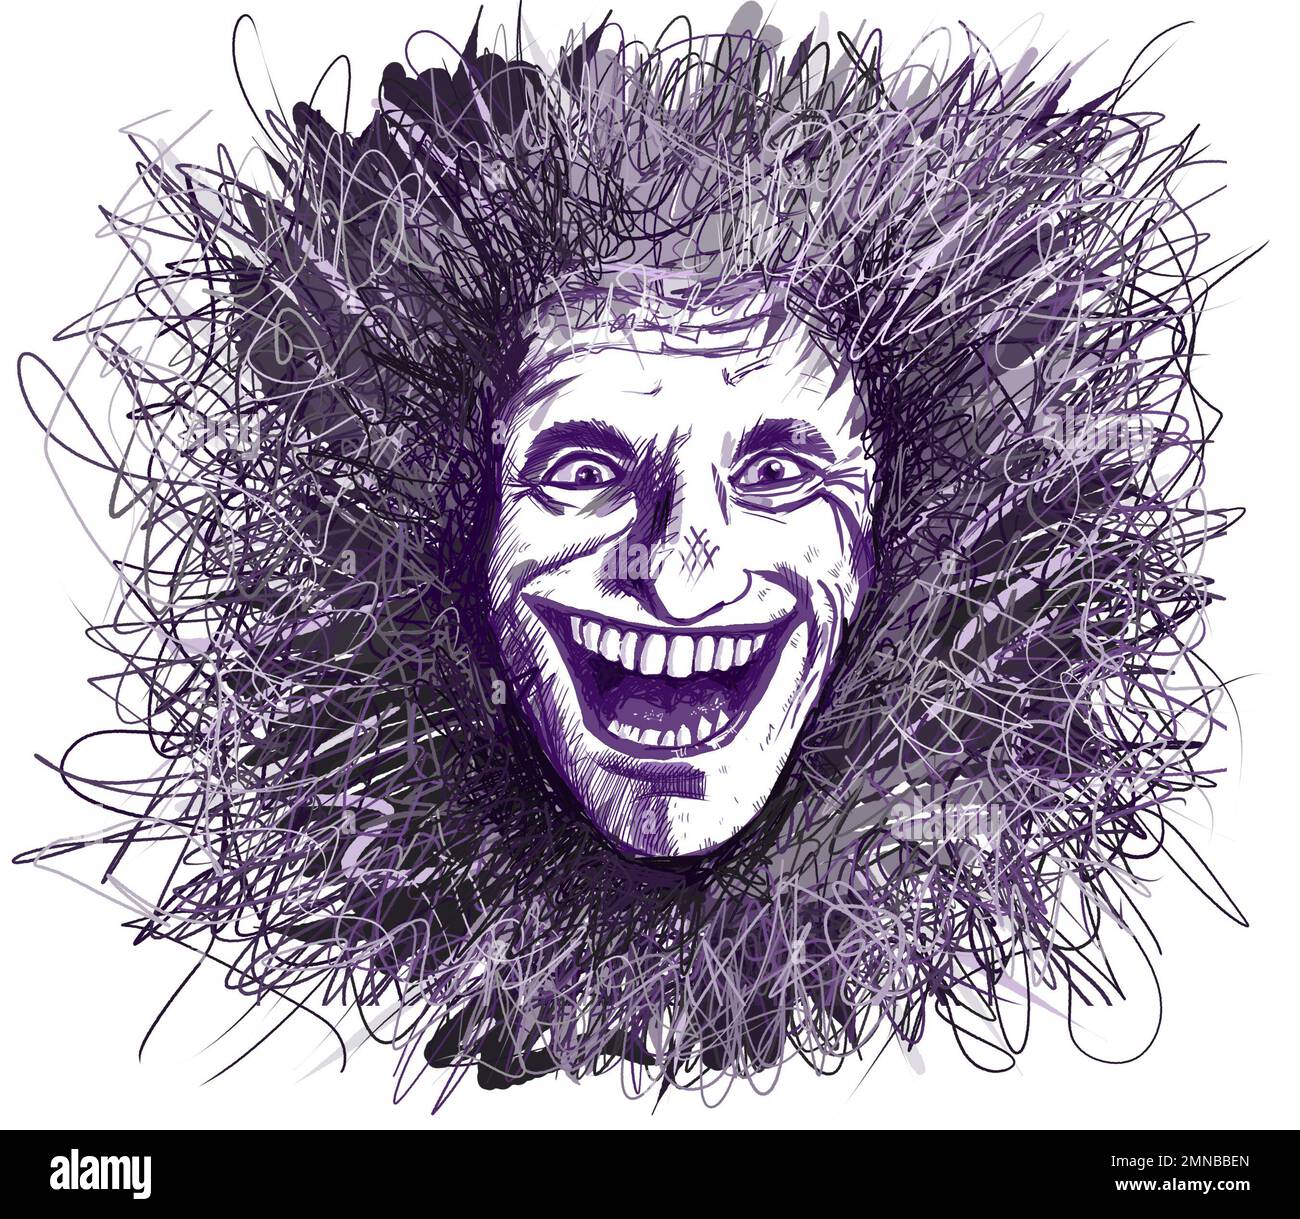 Drawing of a laughing face of a man. High quality illustration Stock Photo